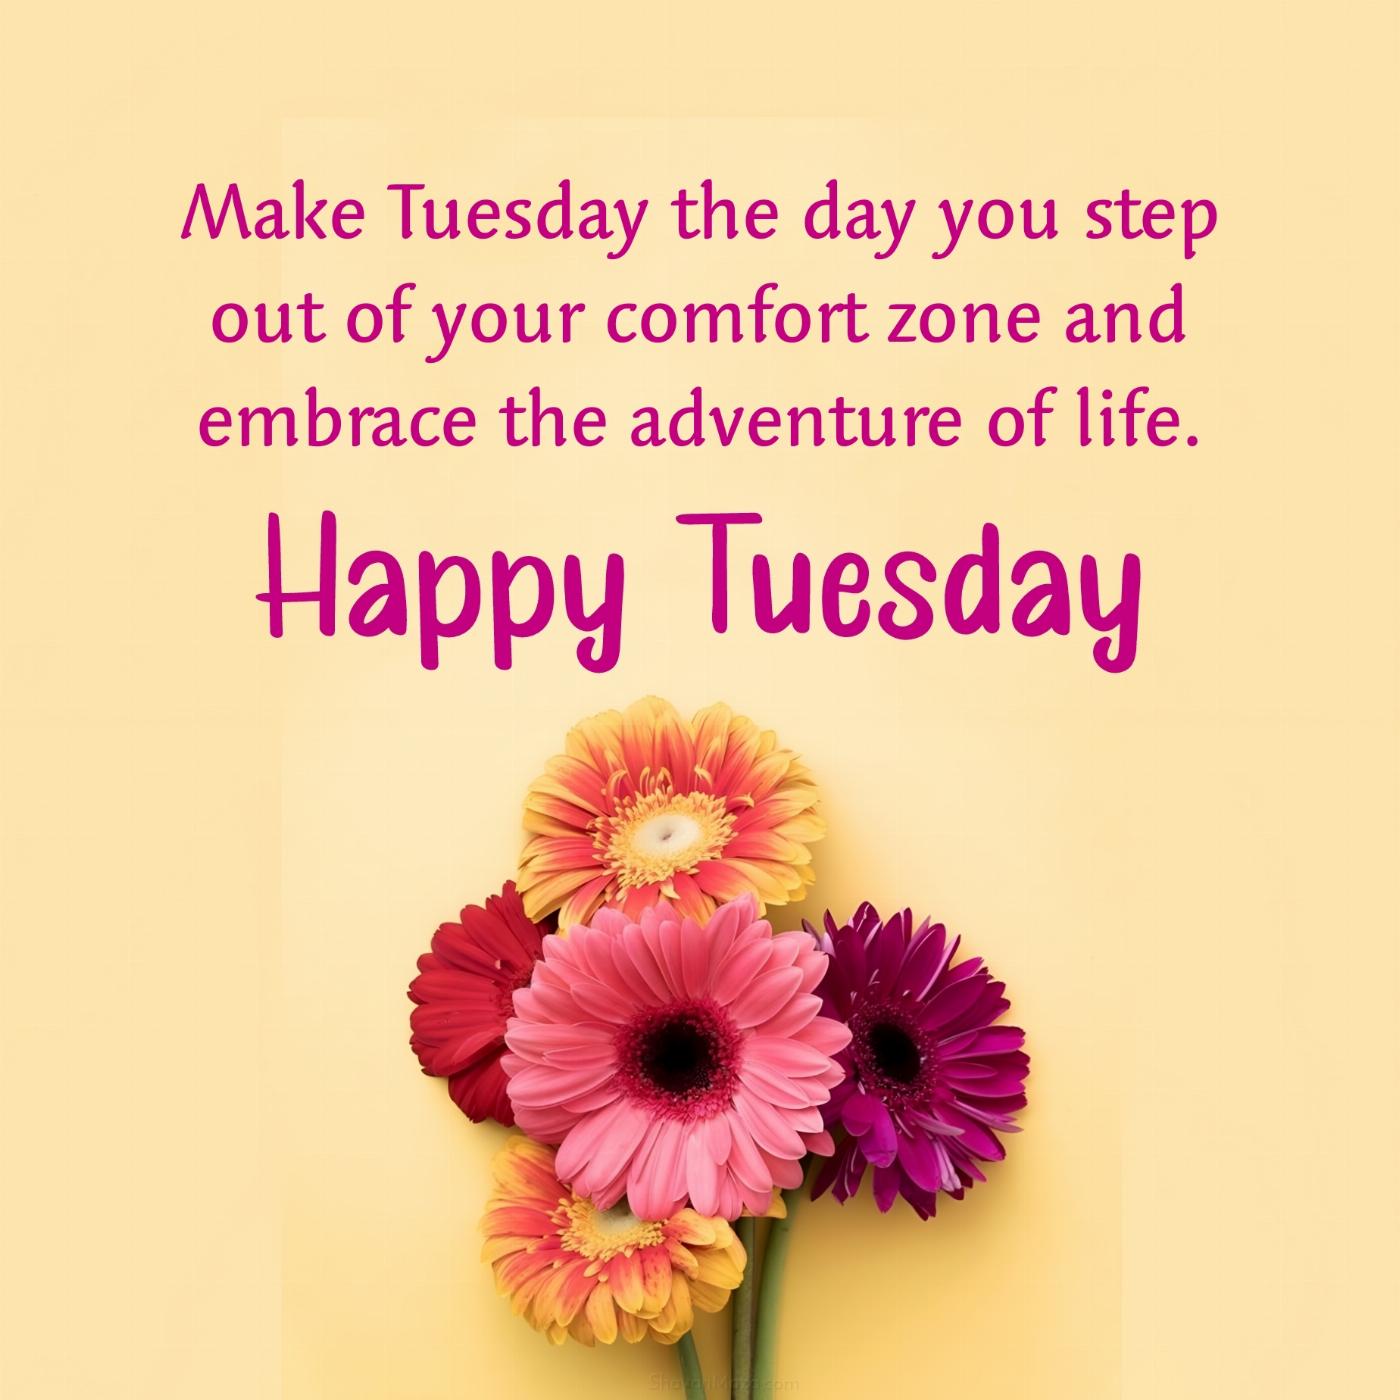 Make Tuesday the day you step out of your comfort zone